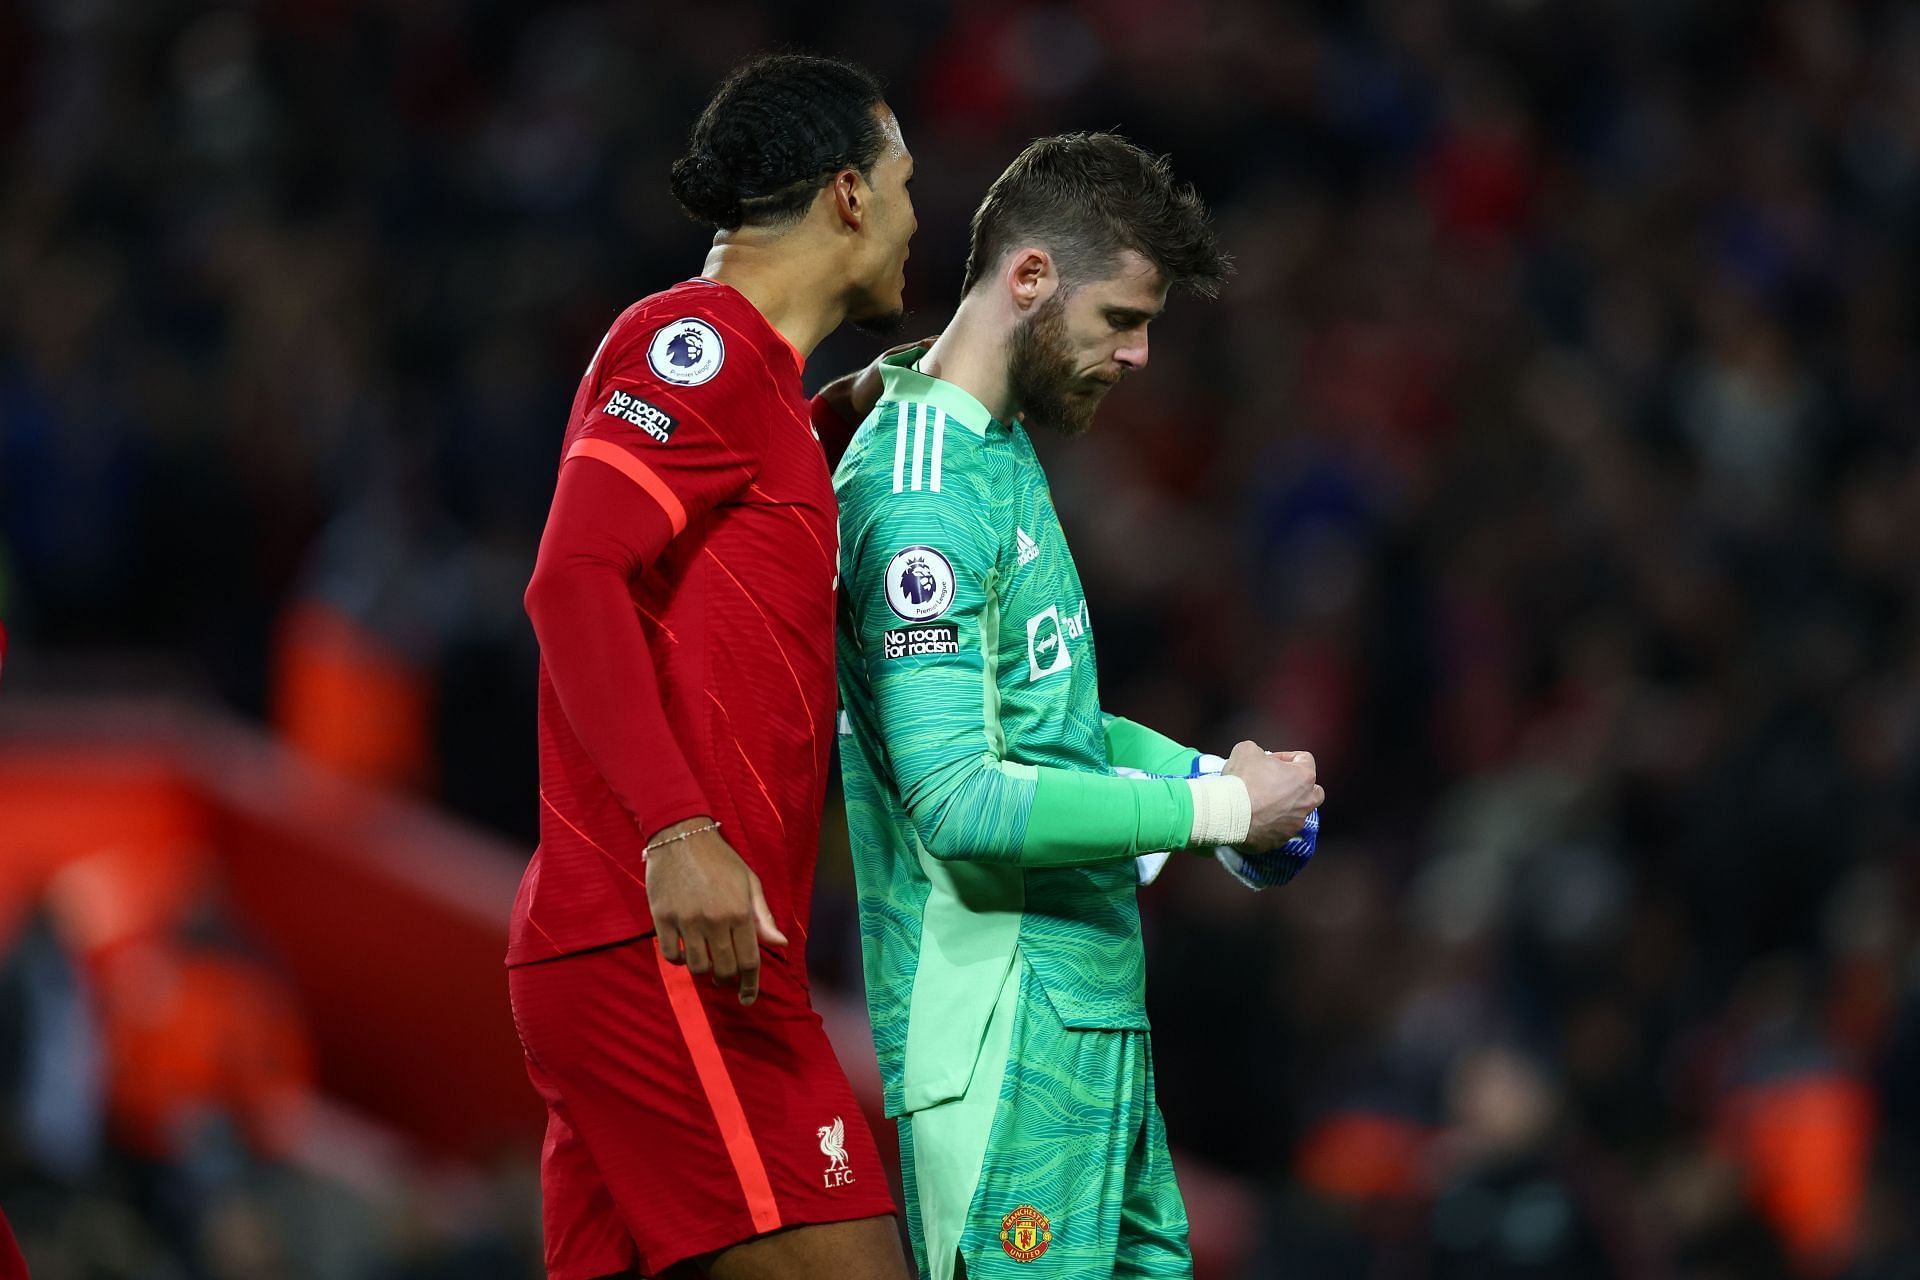 United were woefully beaten by Liverpool